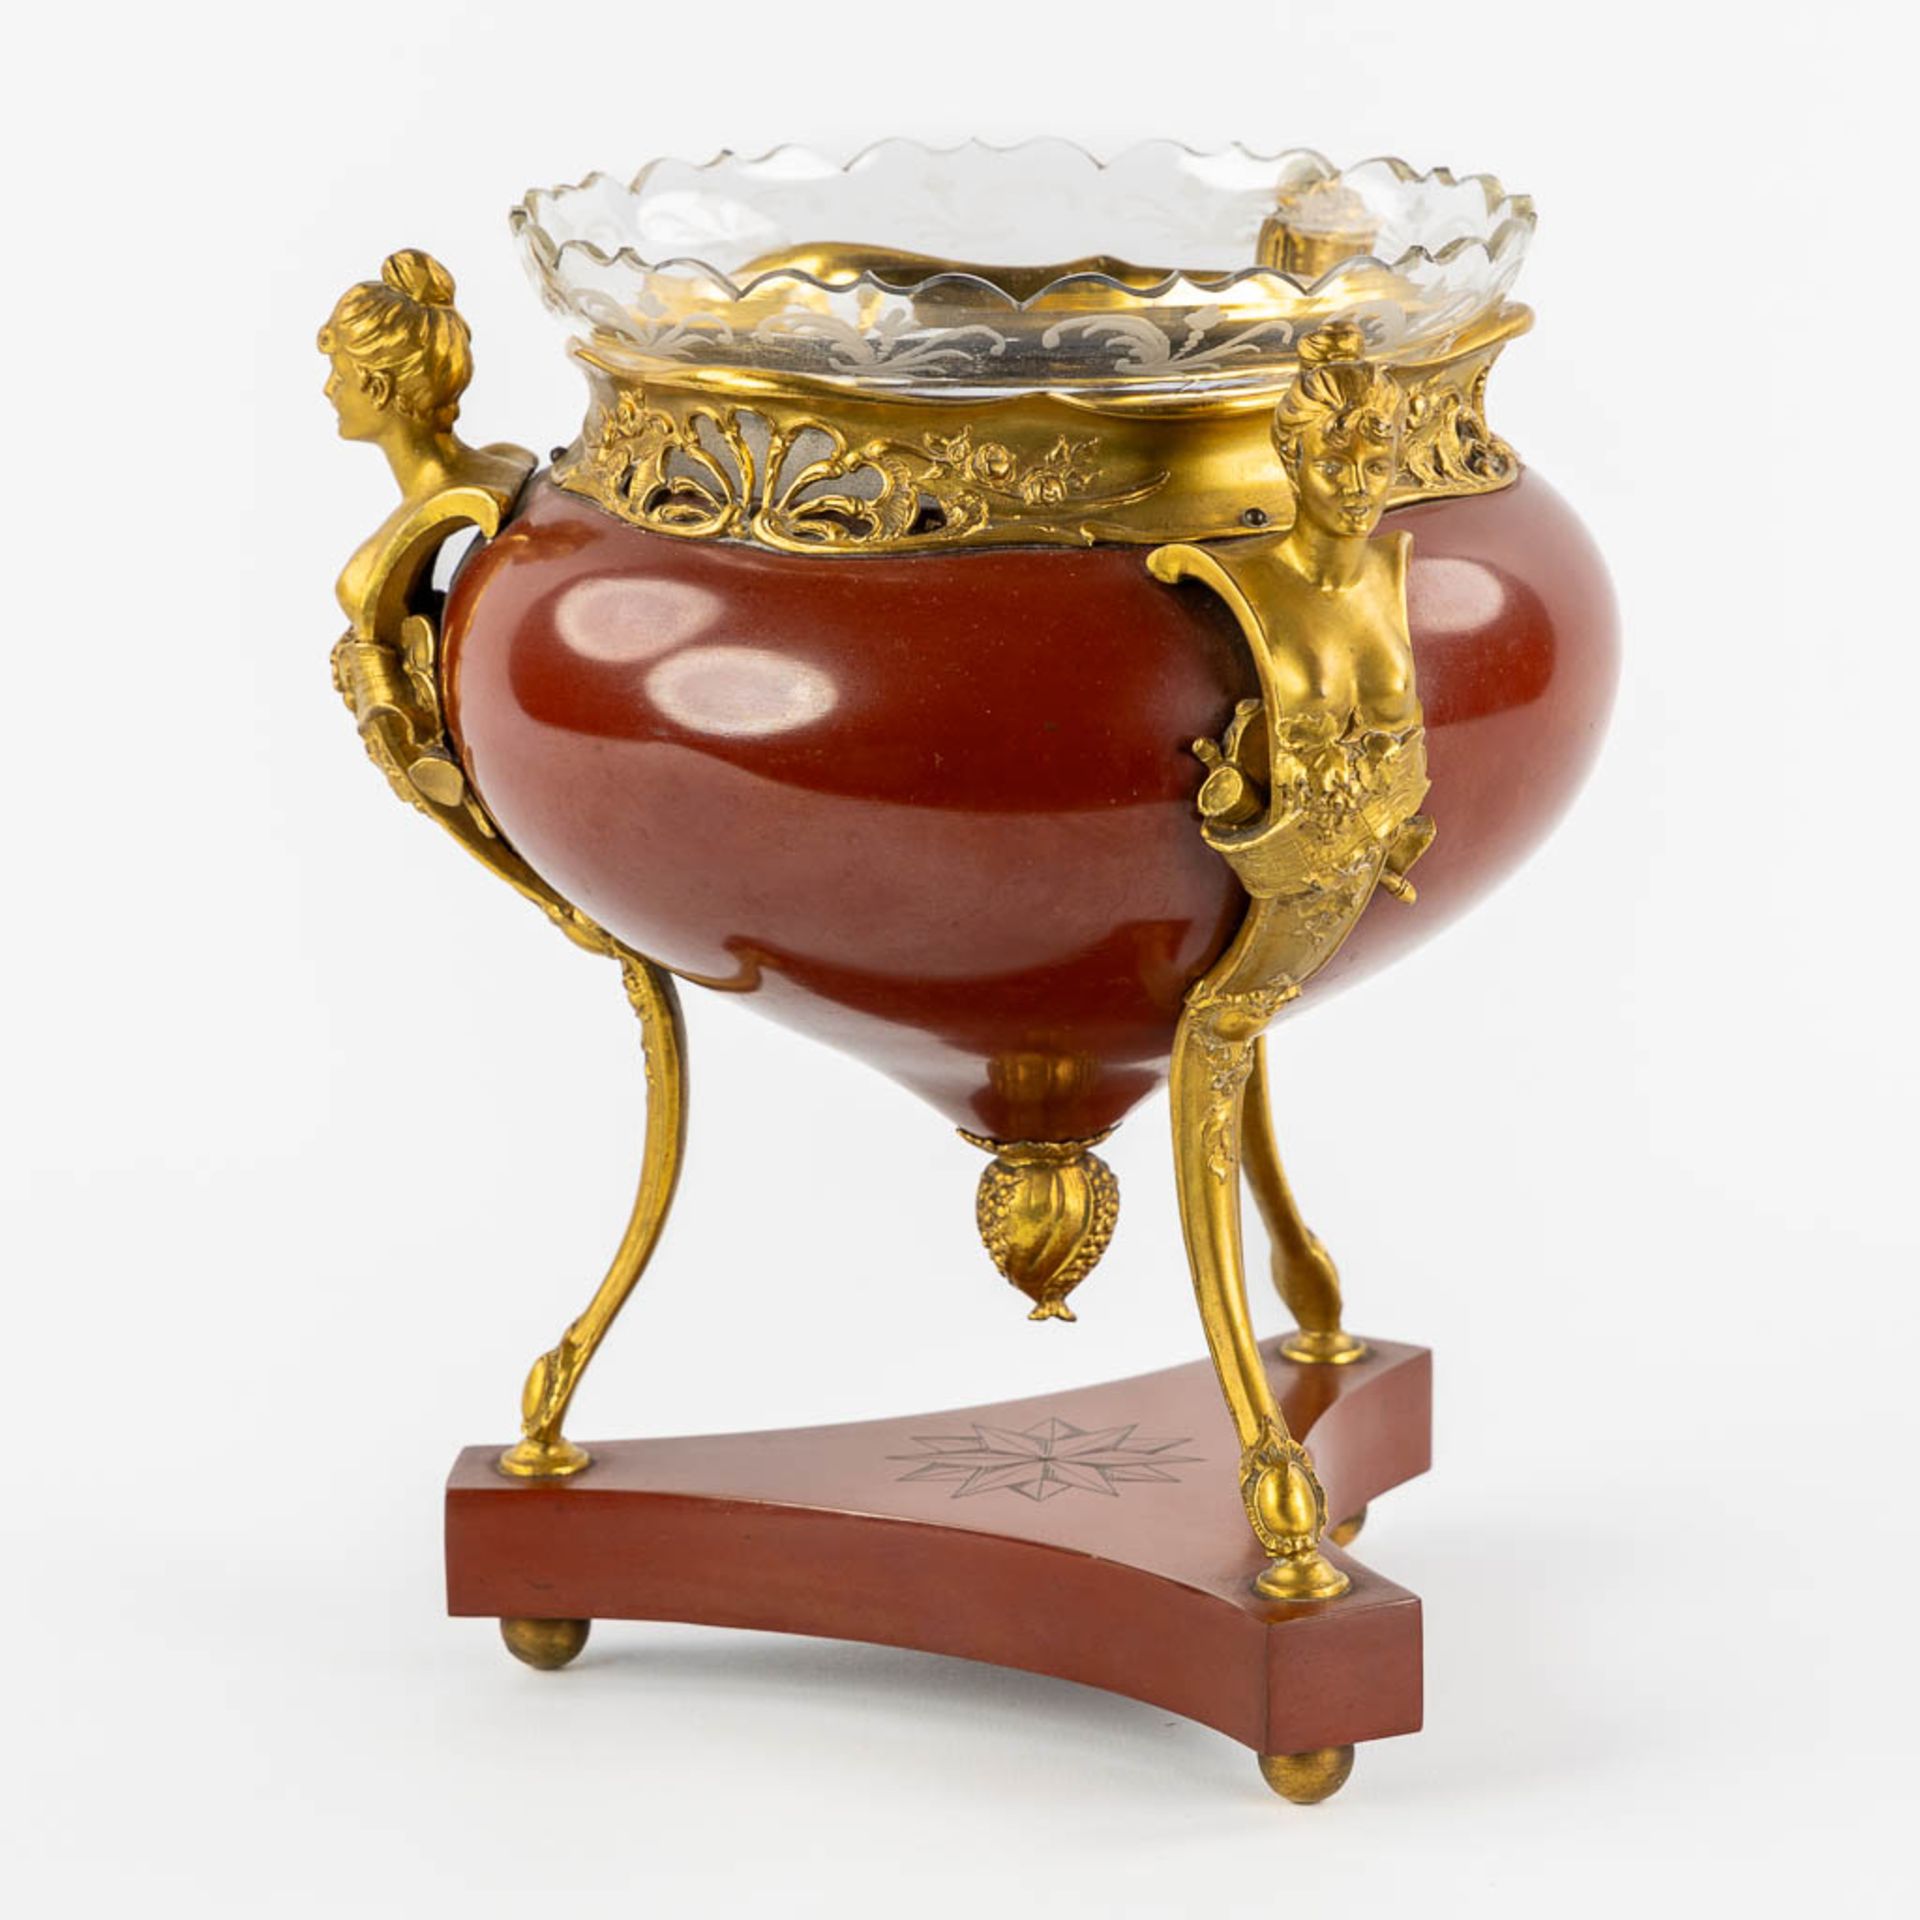 A Table Centerpiece on high feet, gilt and red lacquered bronze in a transitional style. With an etc